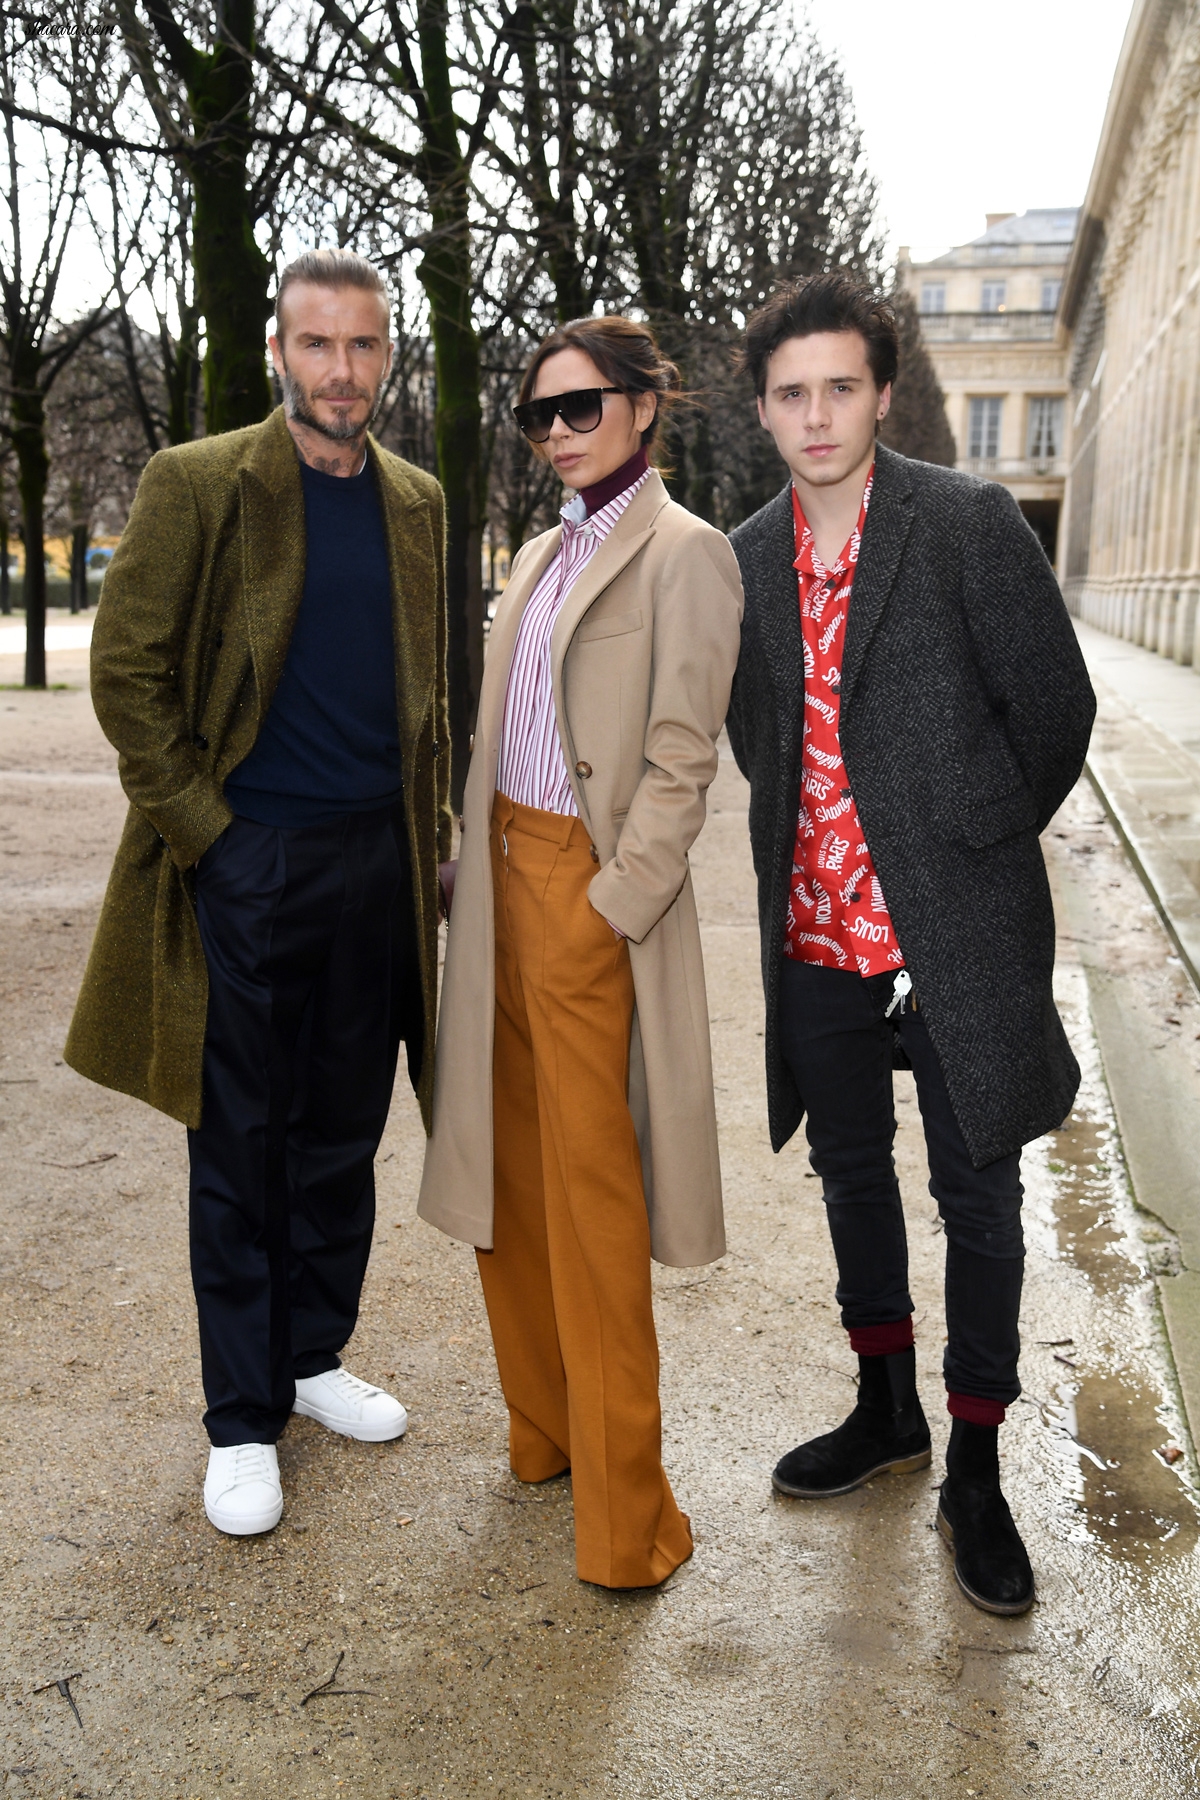 The Beckham Family Shut Down Paris With Their Devastatingly Stylish Outfits